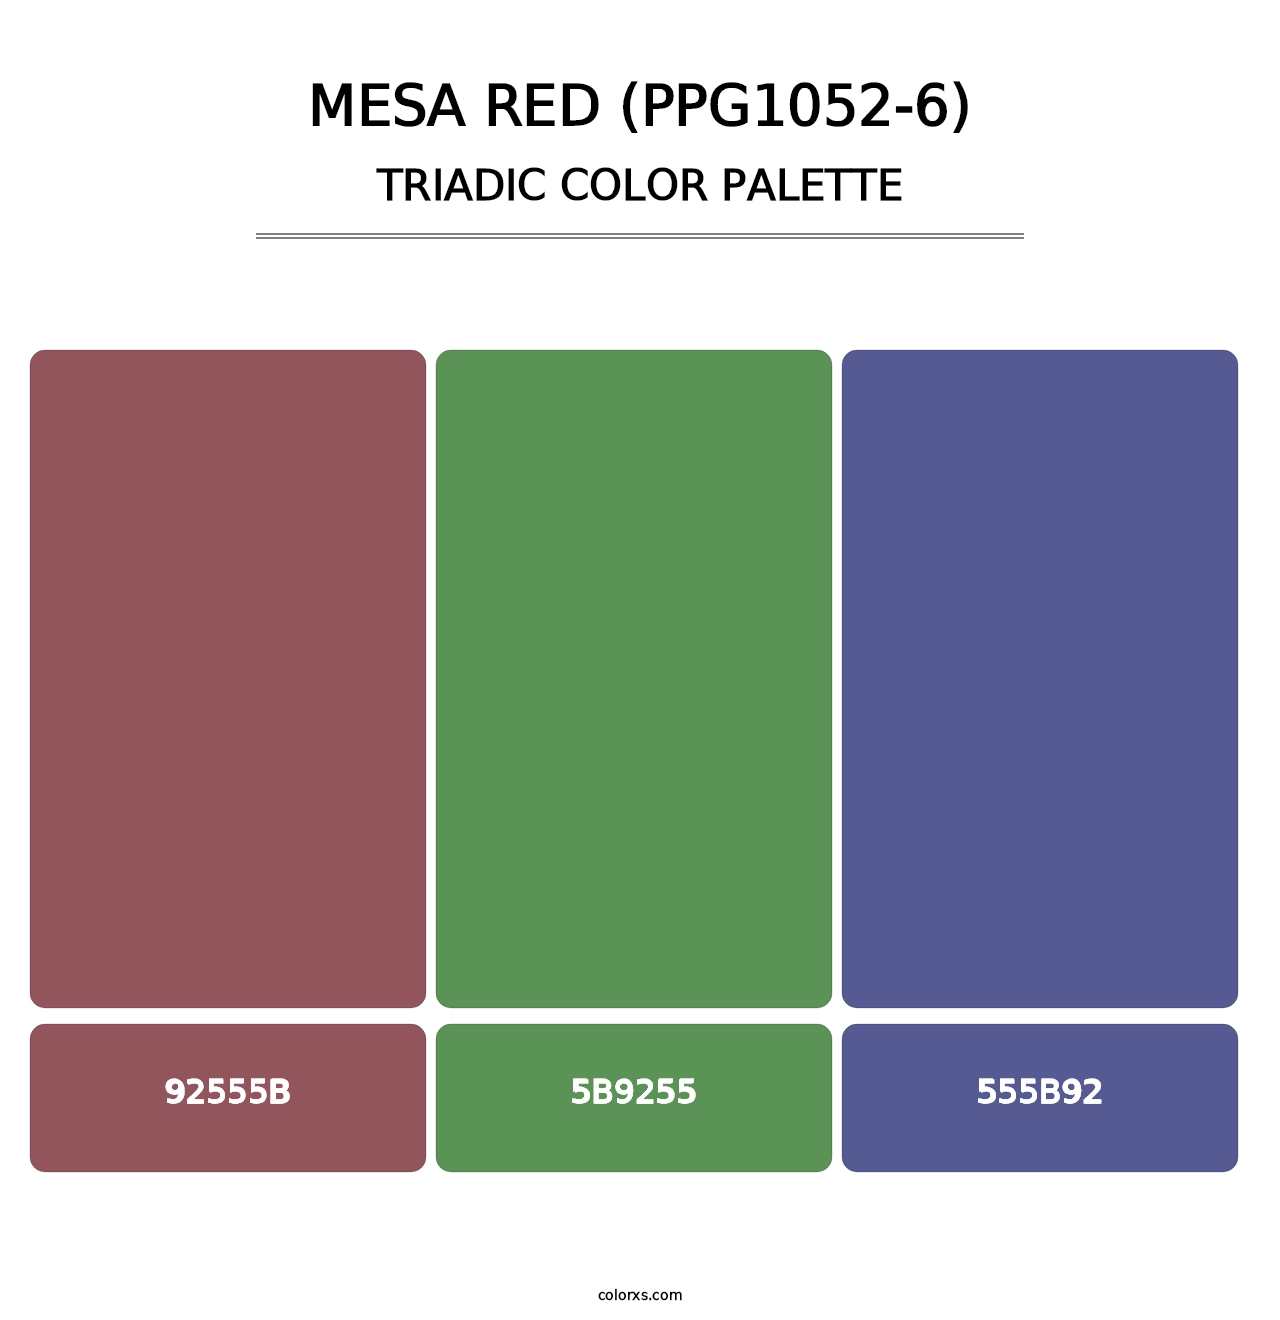 Mesa Red (PPG1052-6) - Triadic Color Palette